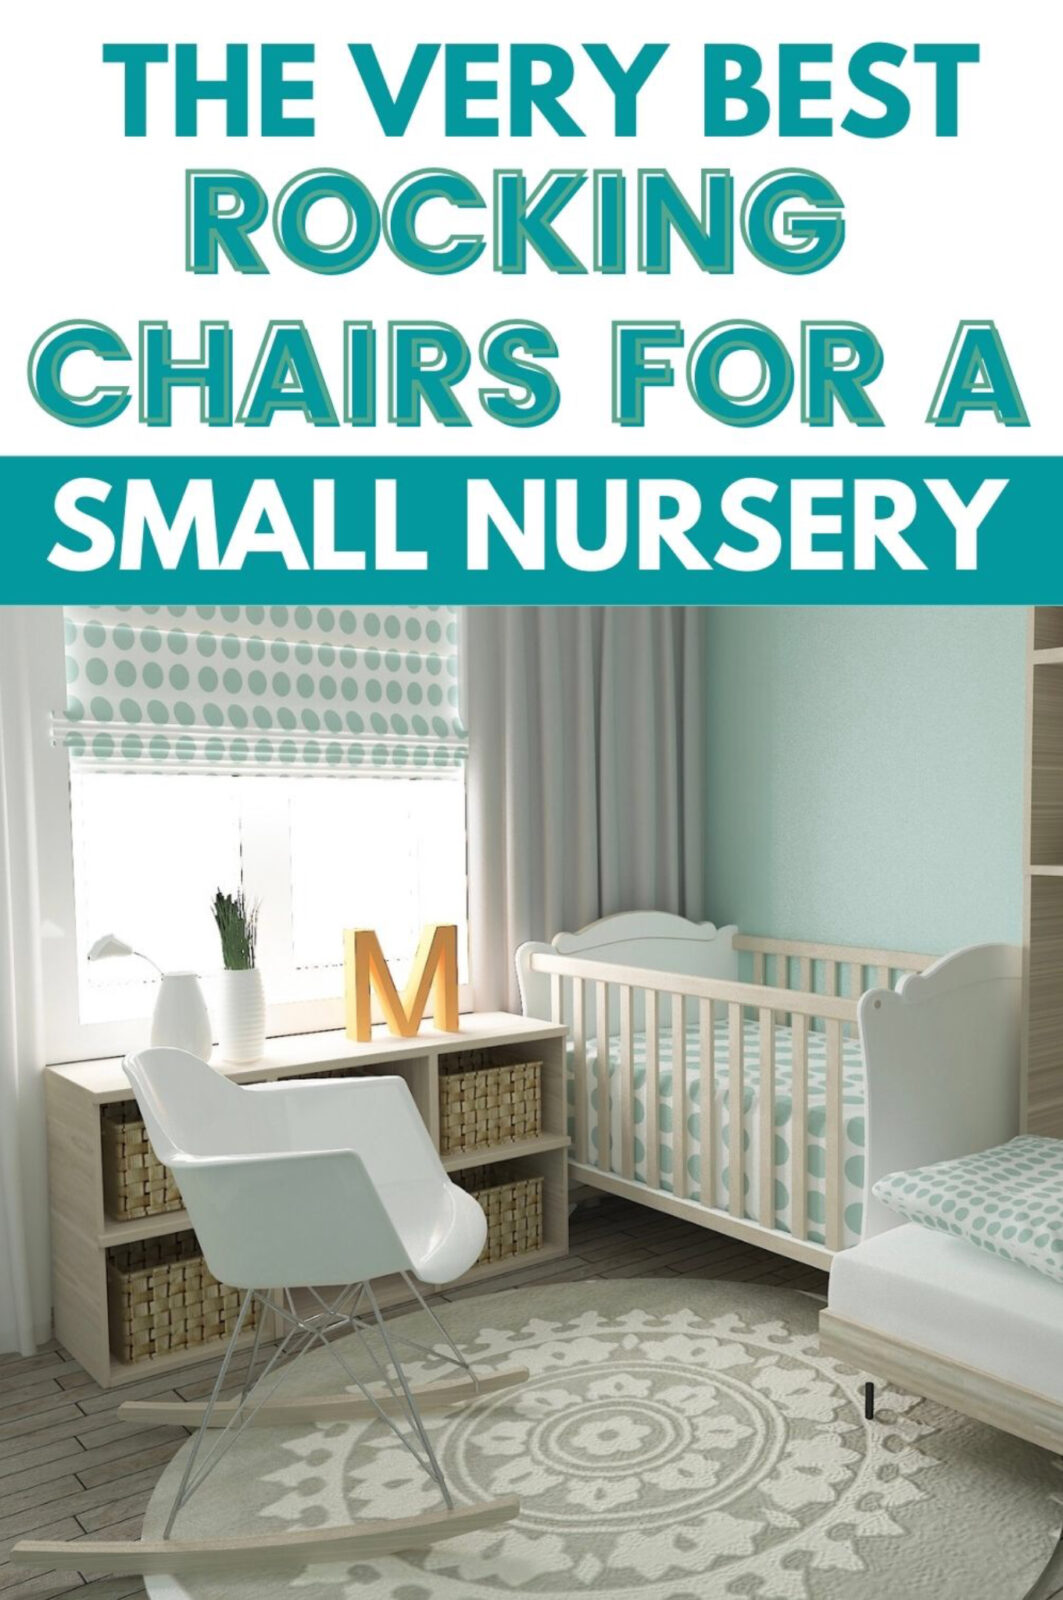 Nursery with cot, shelves and rocking chair, text reads: The very best rocking chairs for a small nursery